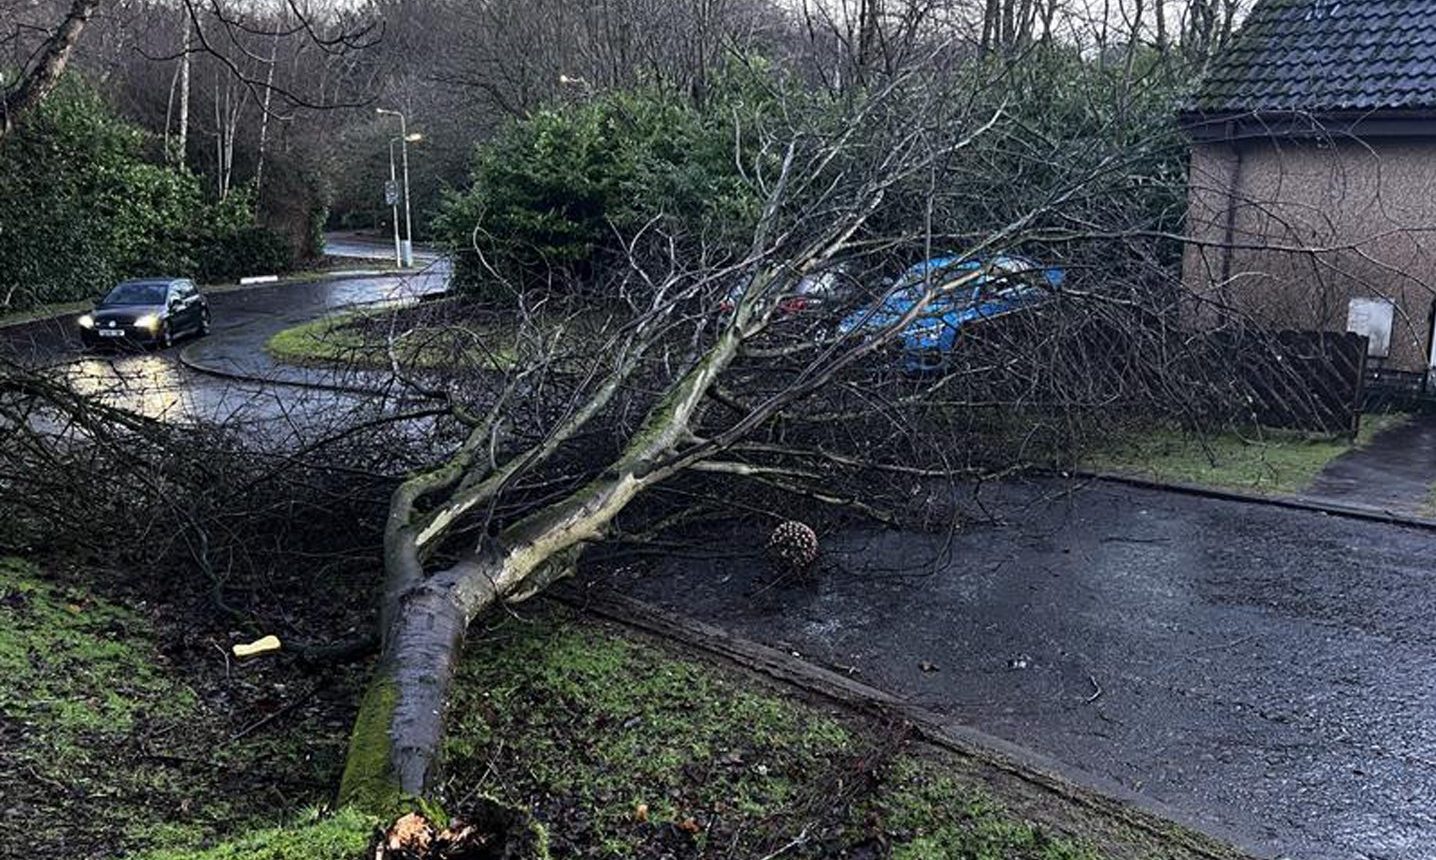 A fallen tree on Granton Court in Glenrothes during Storm Isha. Image: Steve Brown/DC Thomson